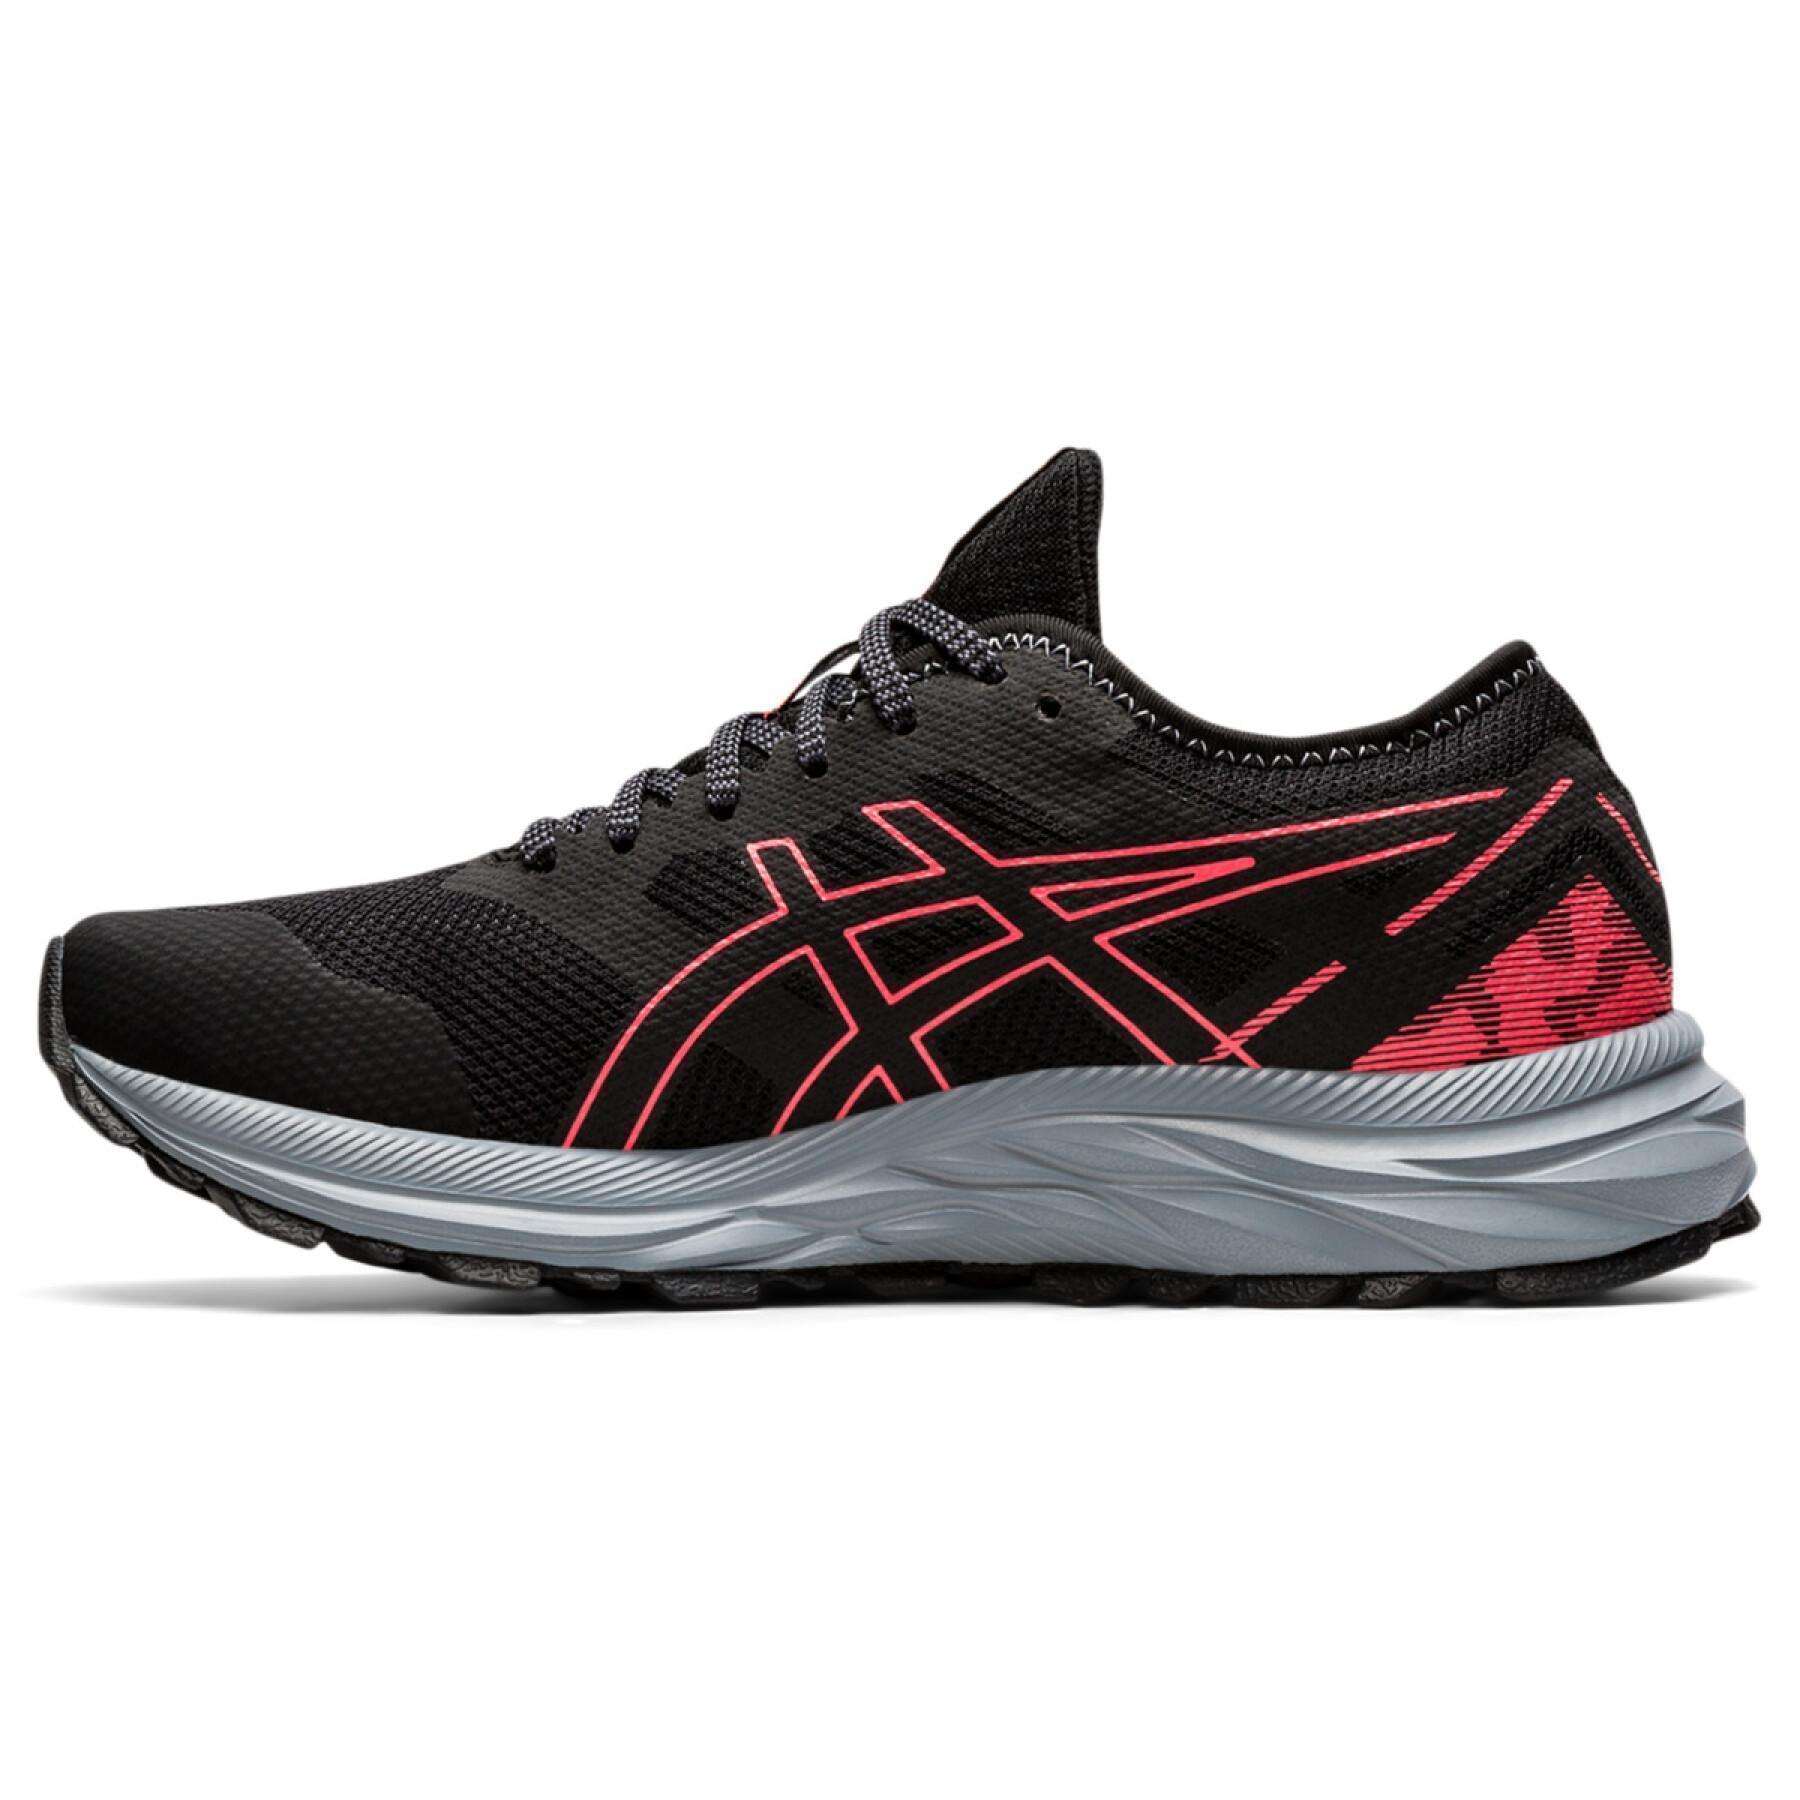 Women's shoes Asics Gel-Excite Trail